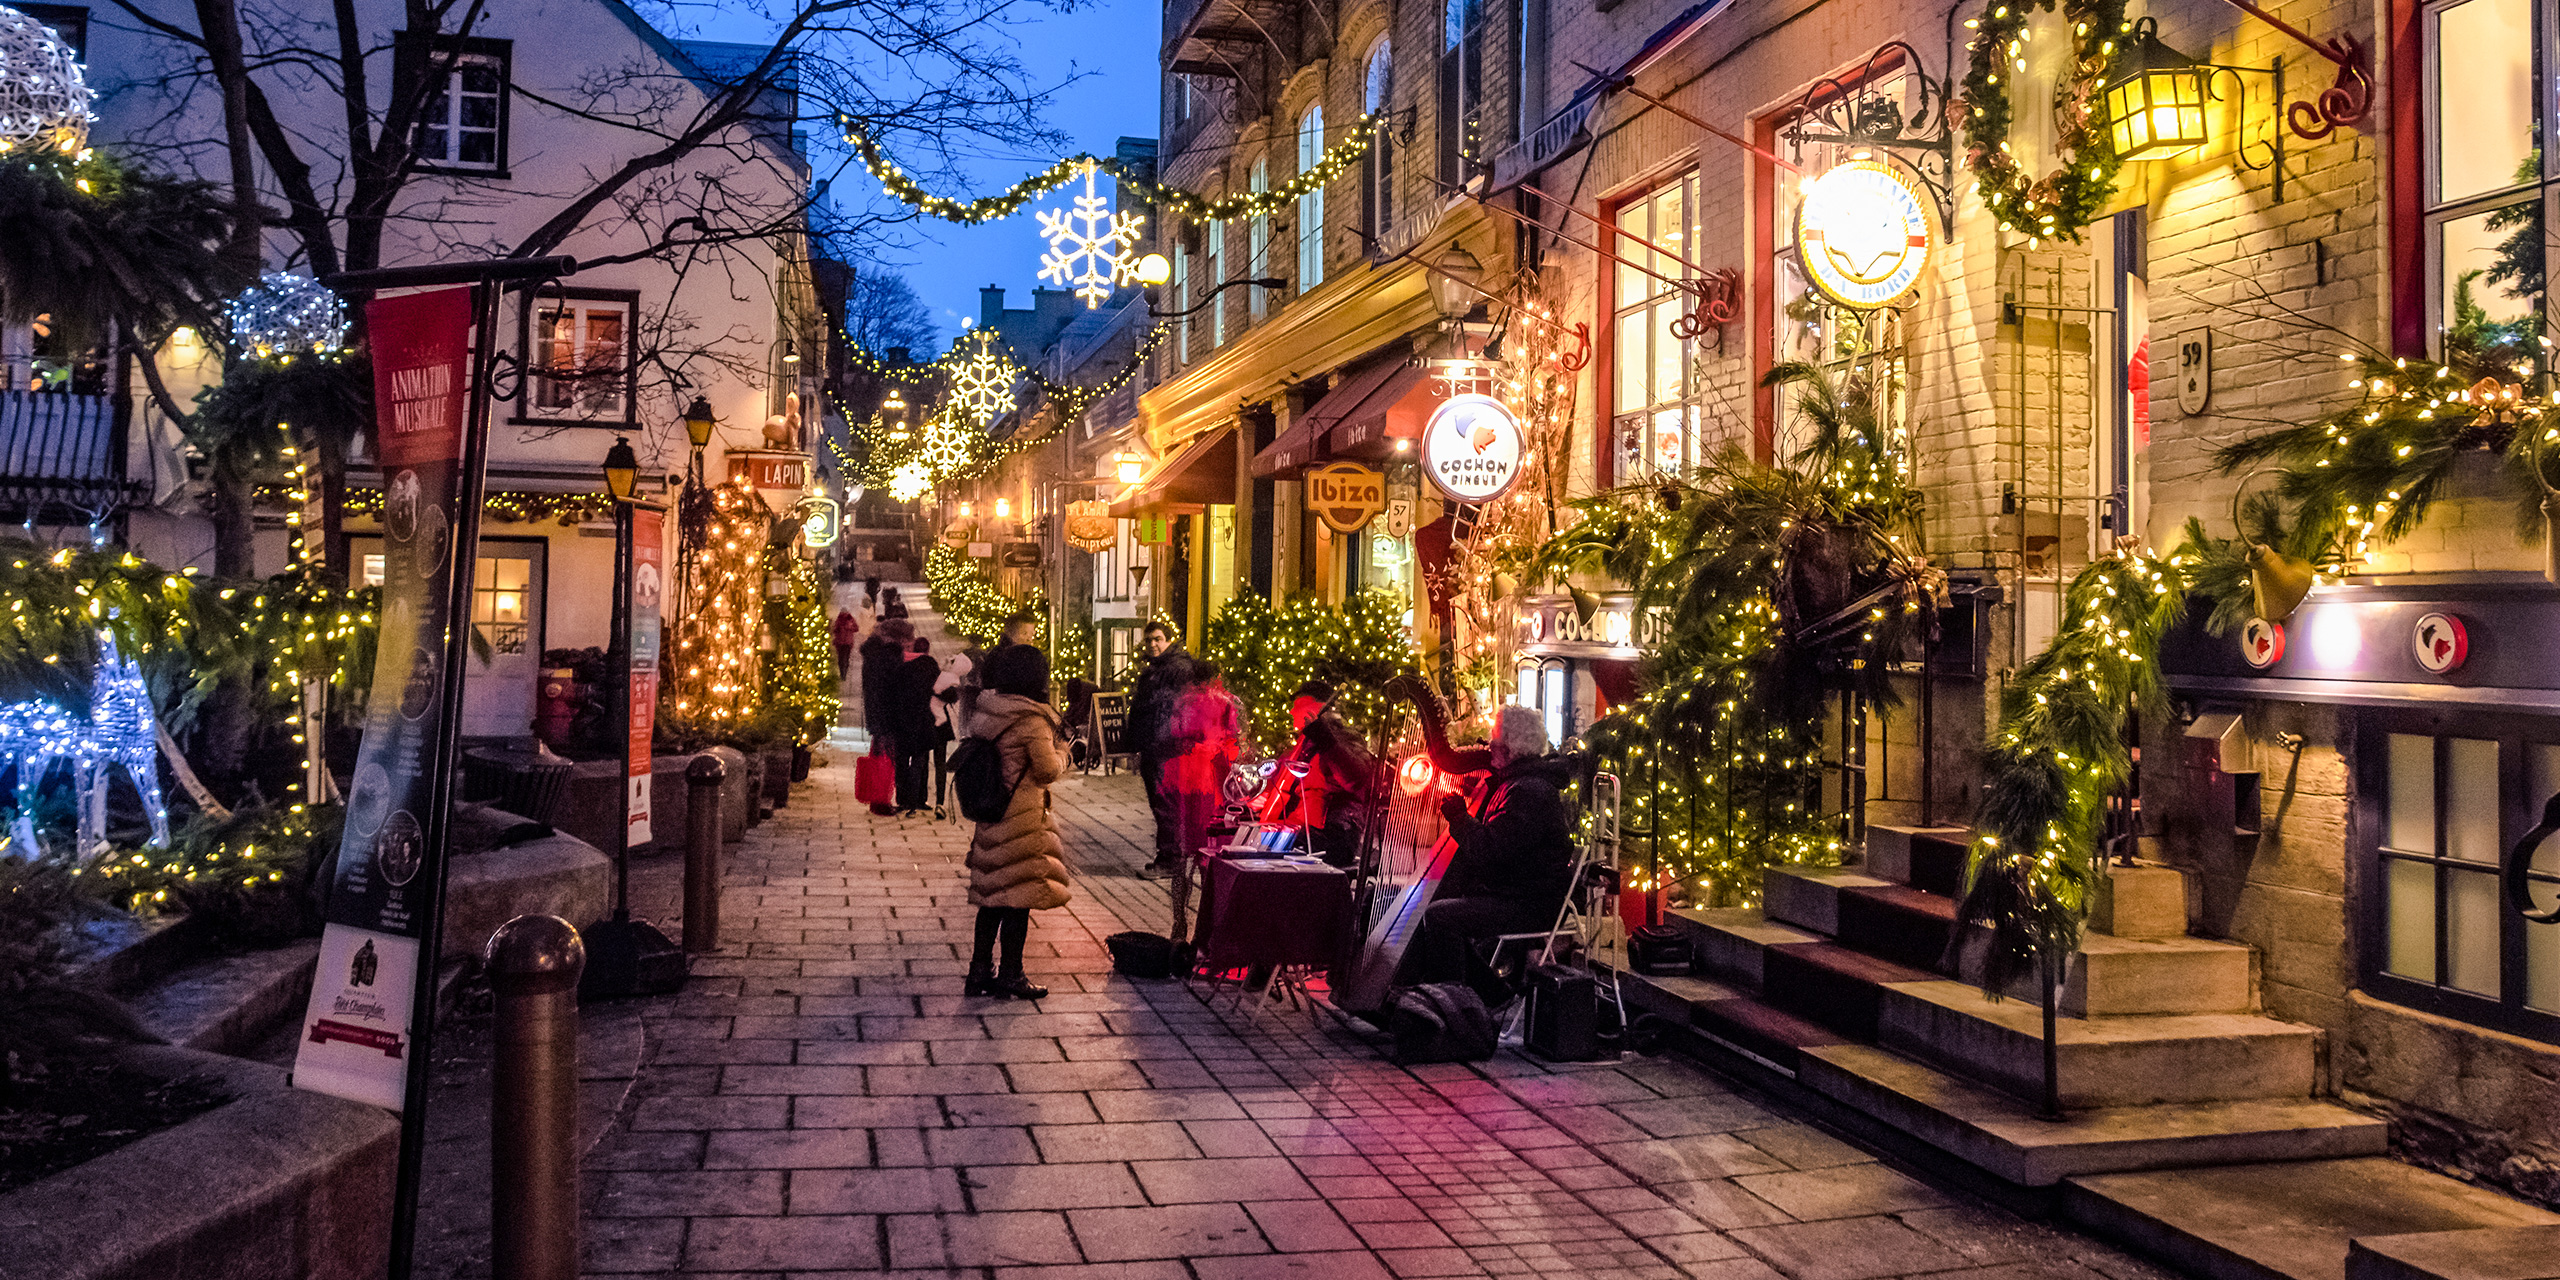 quebec city montreal holiday street; Courtesy of By AnjelikaGr/Shutterstock